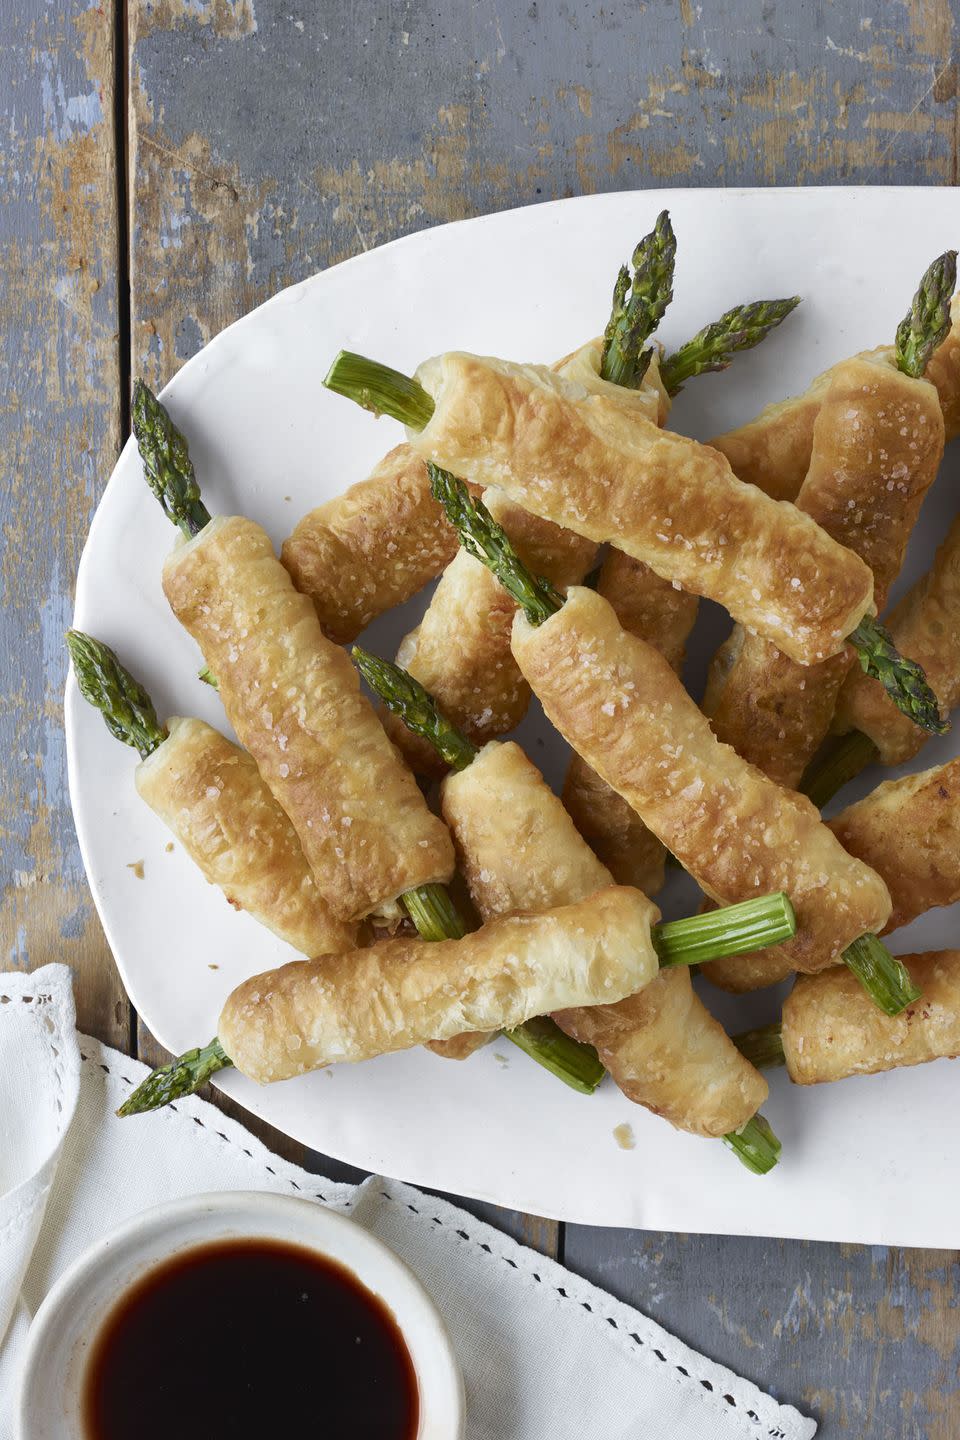 Pastry-Wrapped Asparagus with Balsamic Dipping Sauce